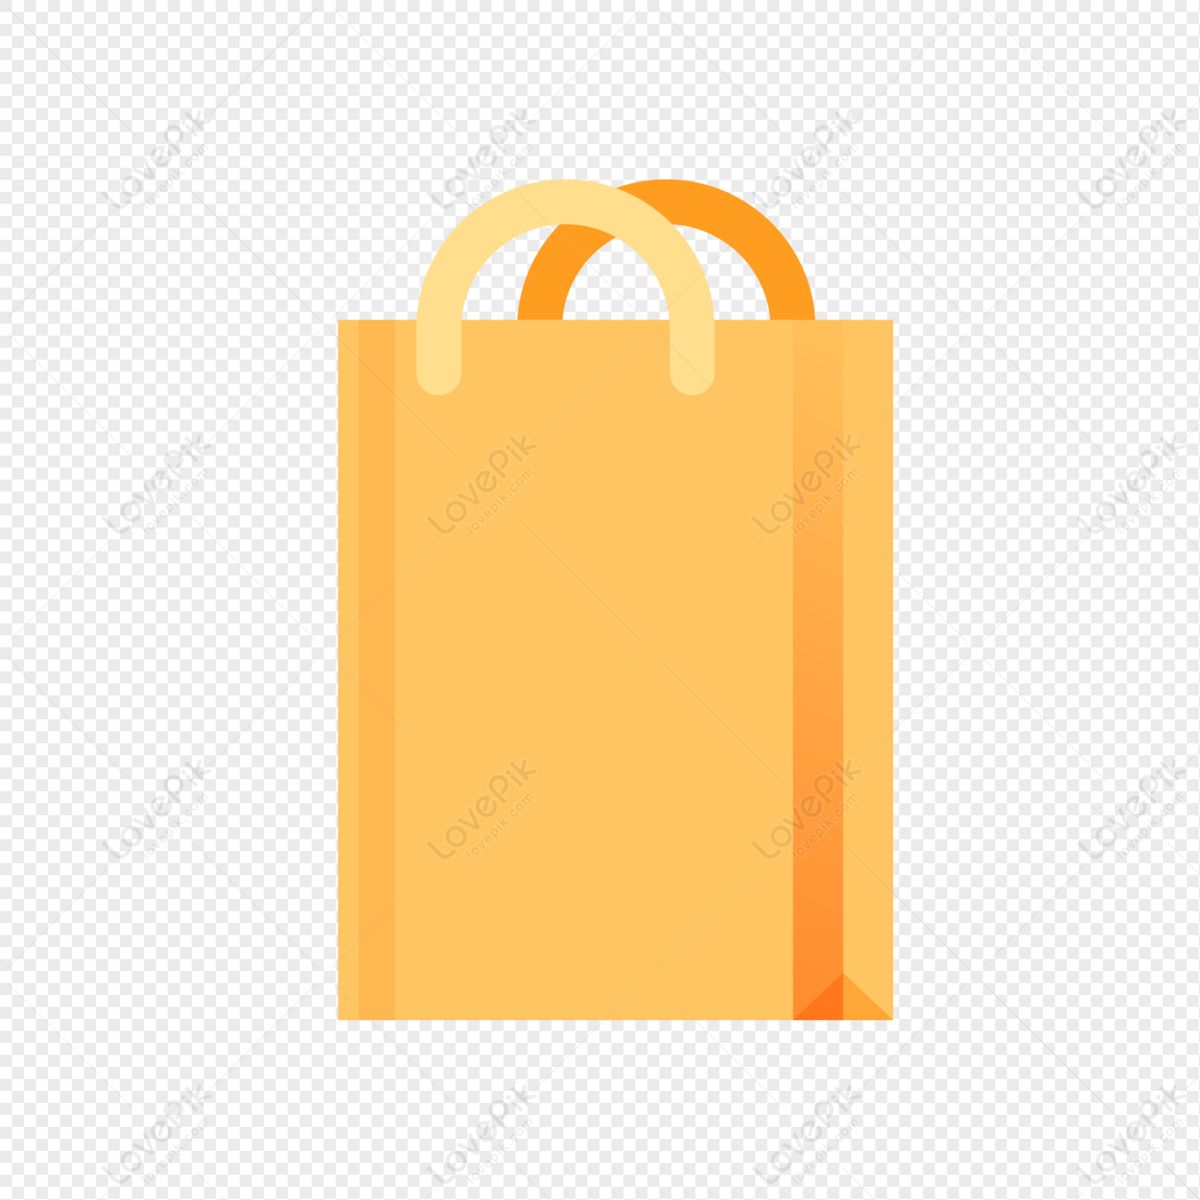 Shopping Bag PNG Transparent Image And Clipart Image For Free Download ...